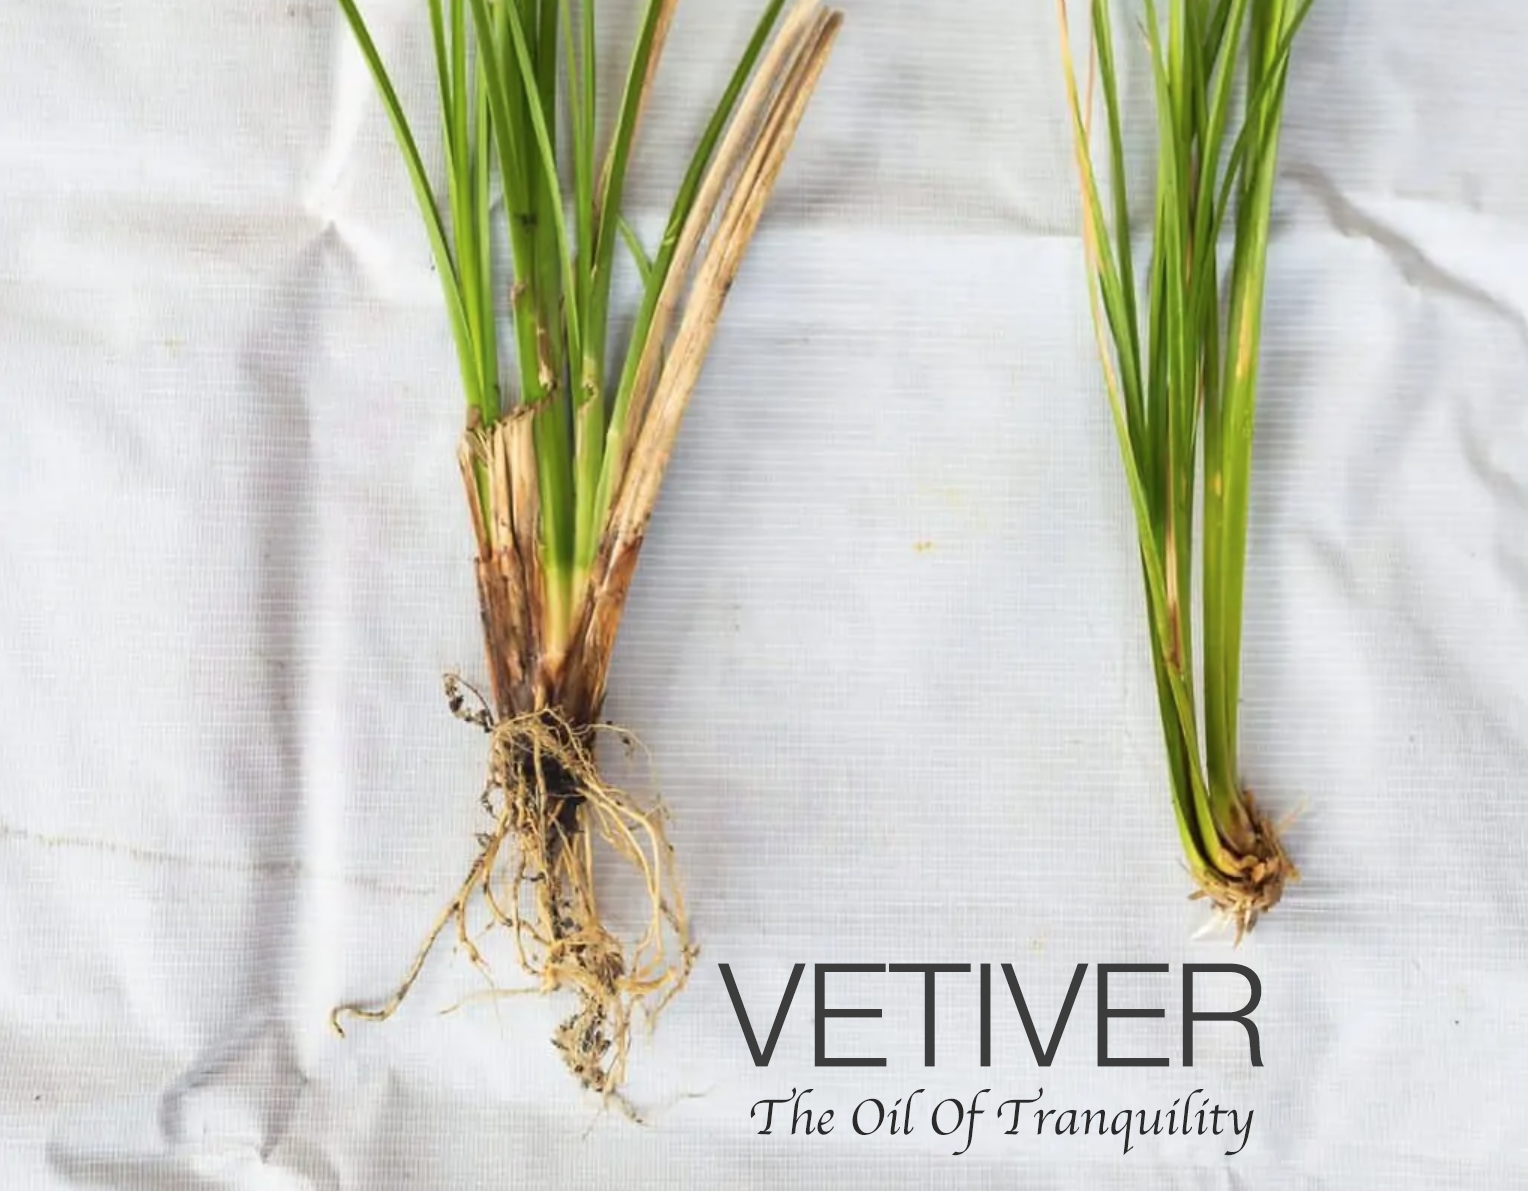 Vetiver grass and root